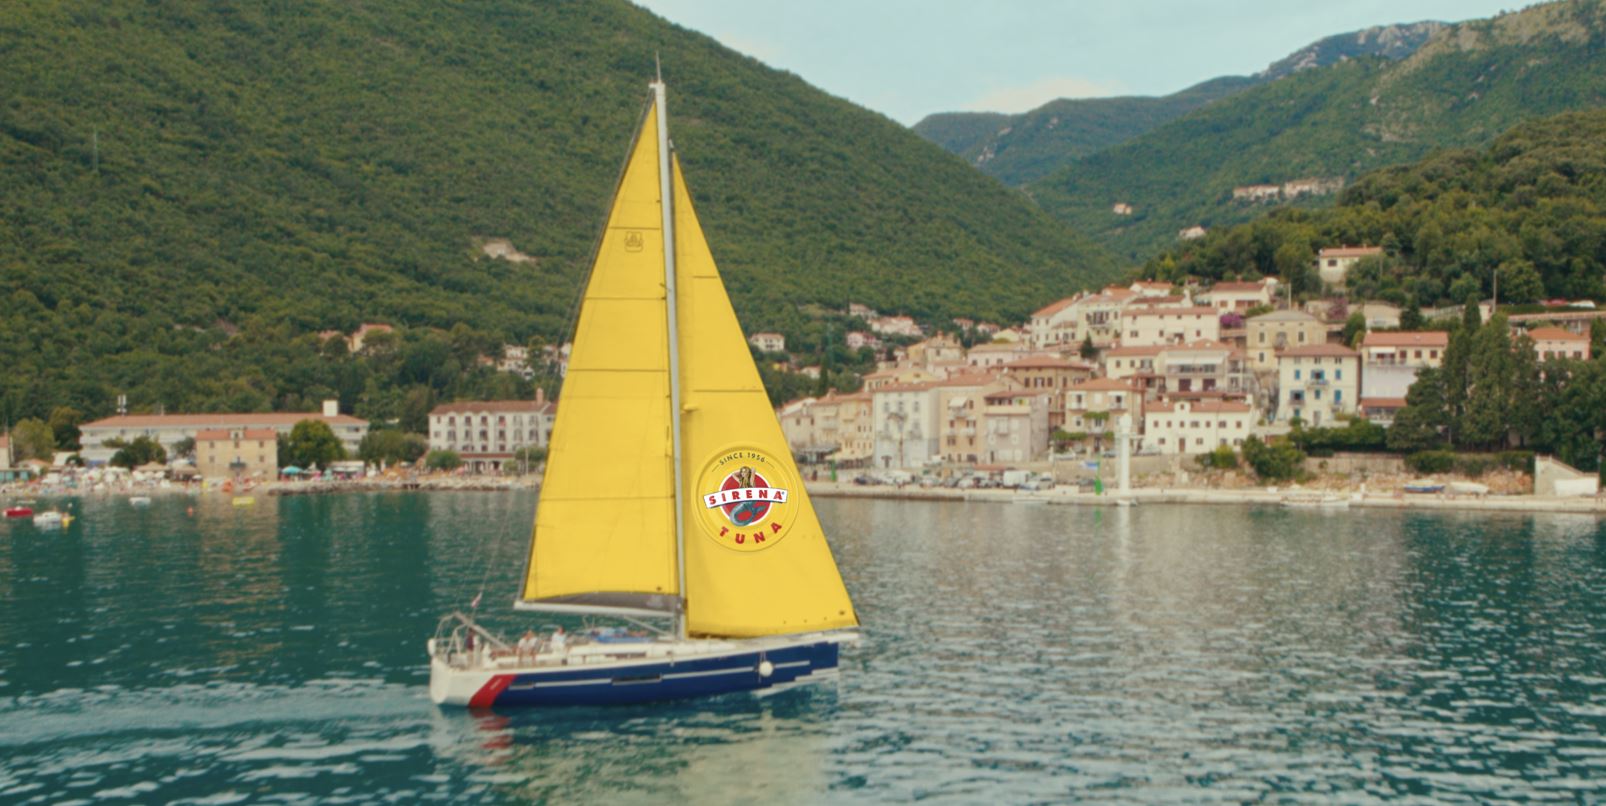 Boat with yellow Sirena sail in the Mediterranean Sea